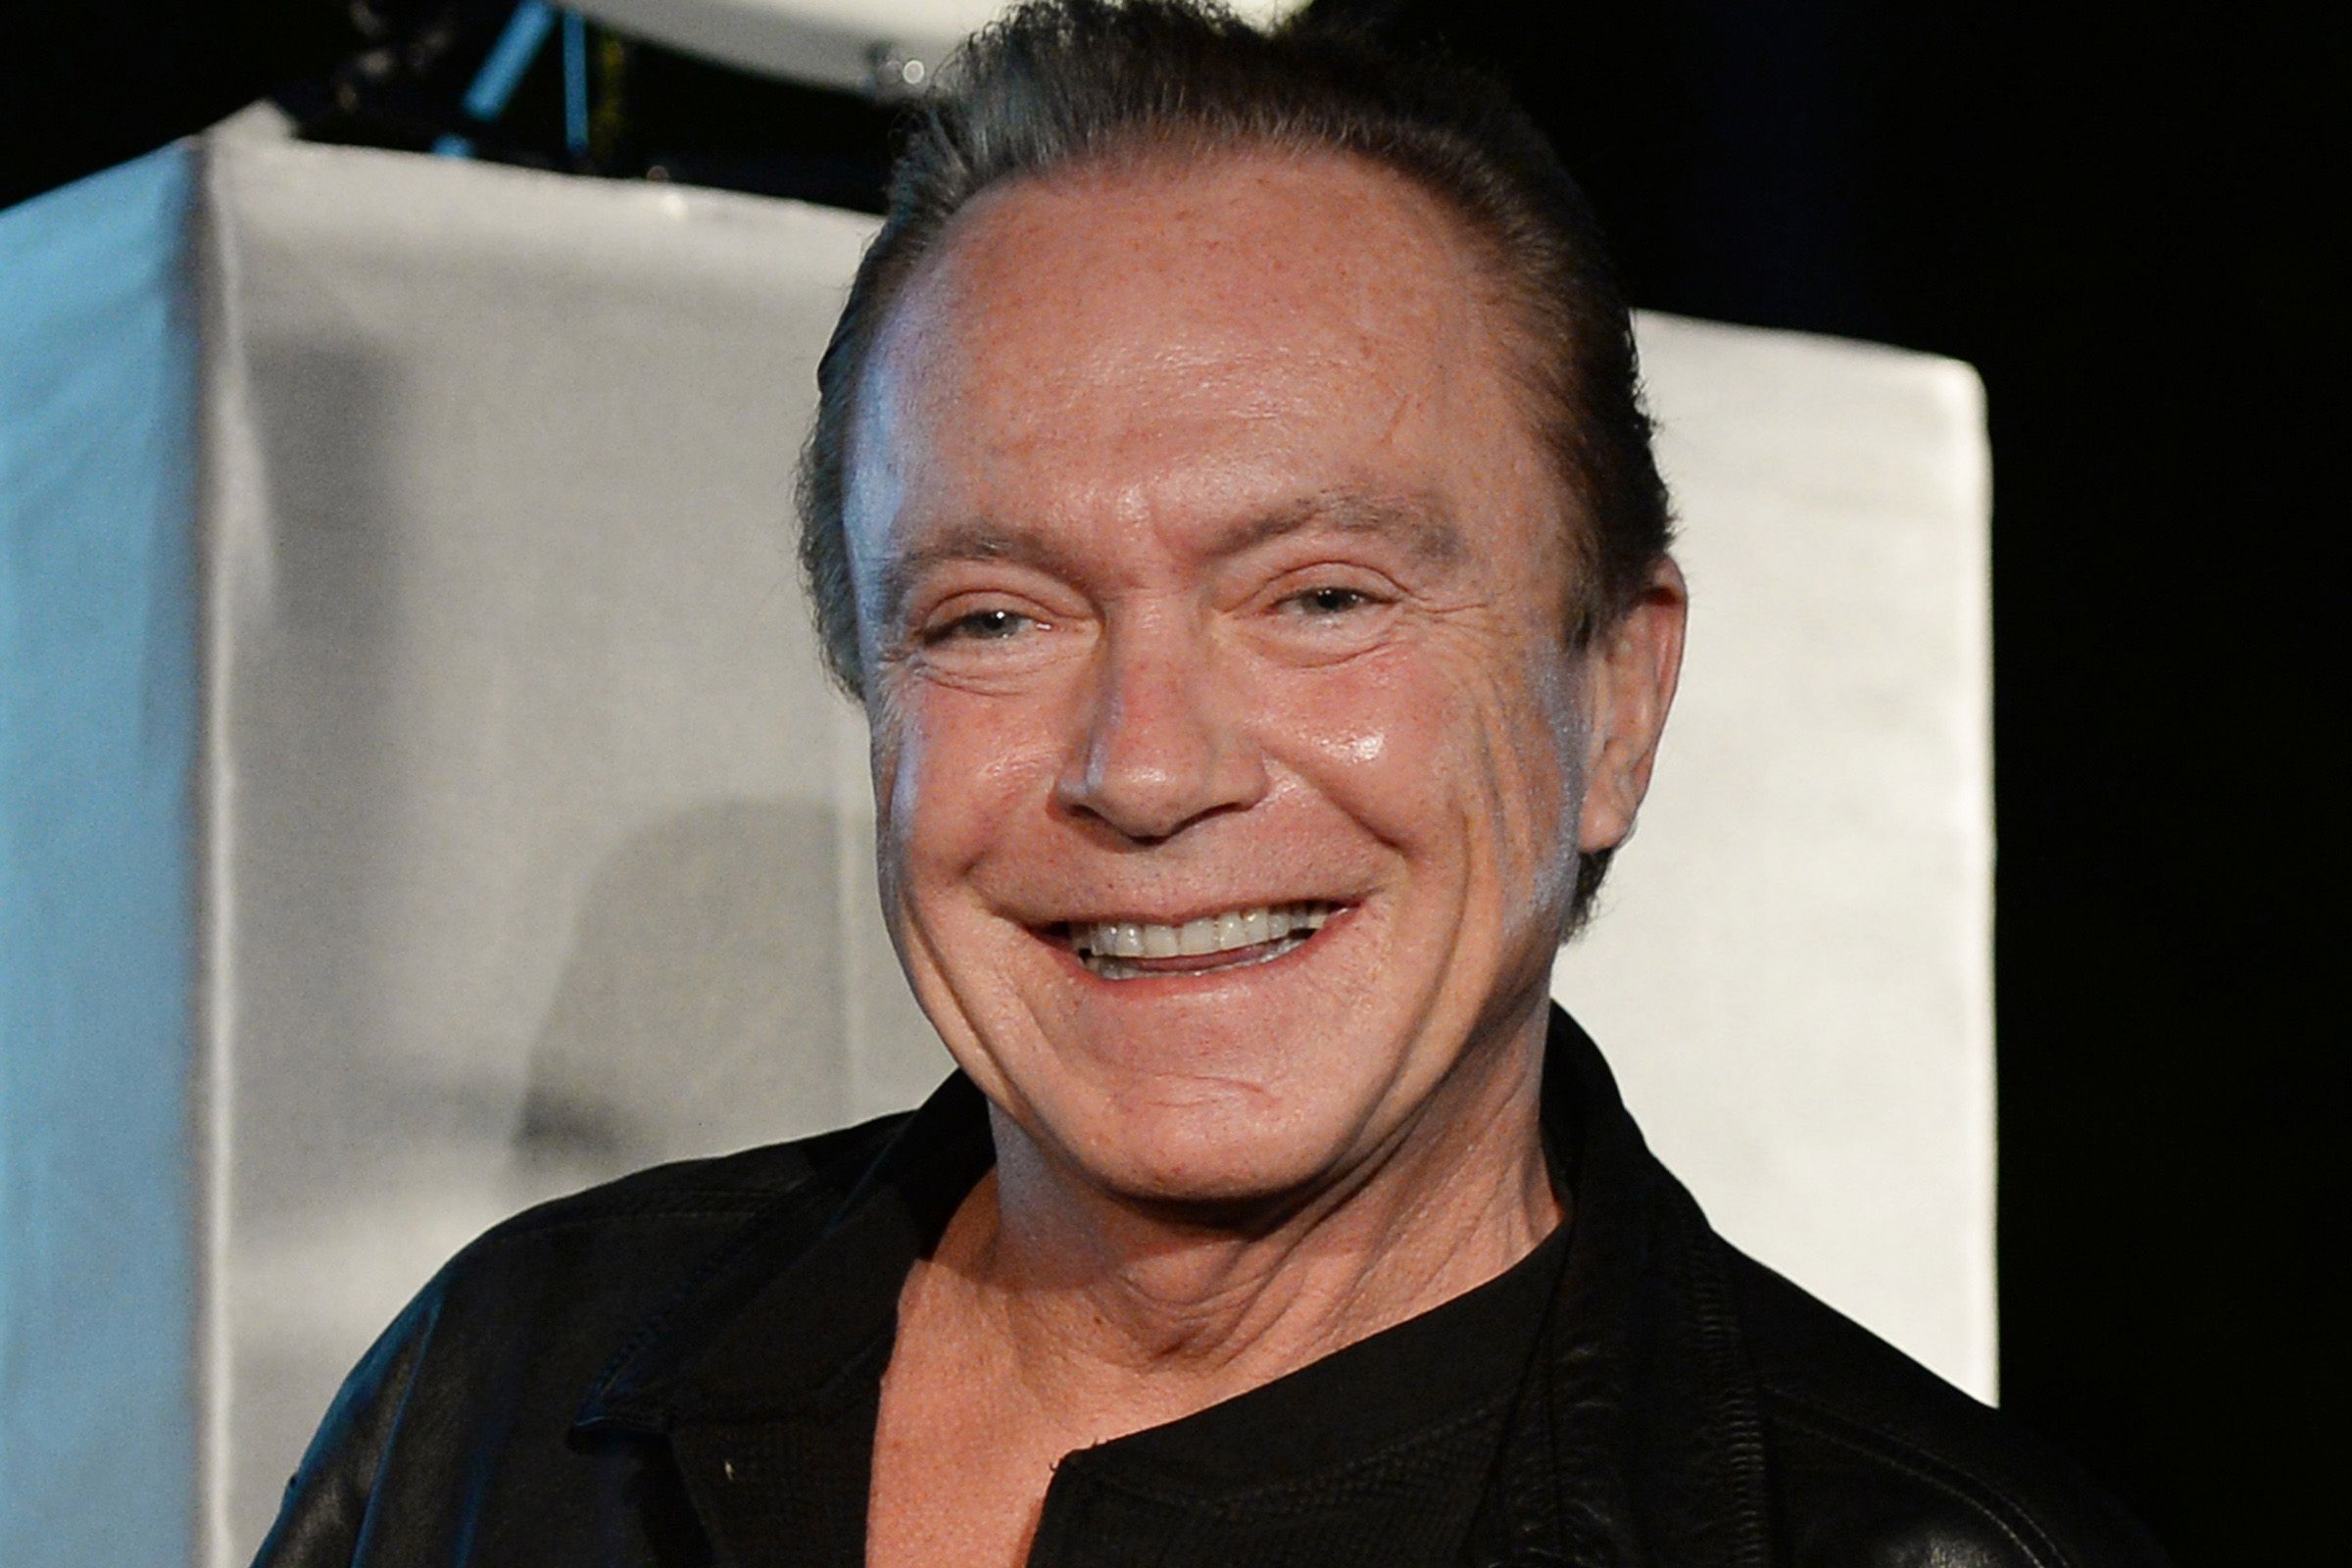 David Cassidy Passed Away At 67 Final Days Violation of Doctor’s Orders!